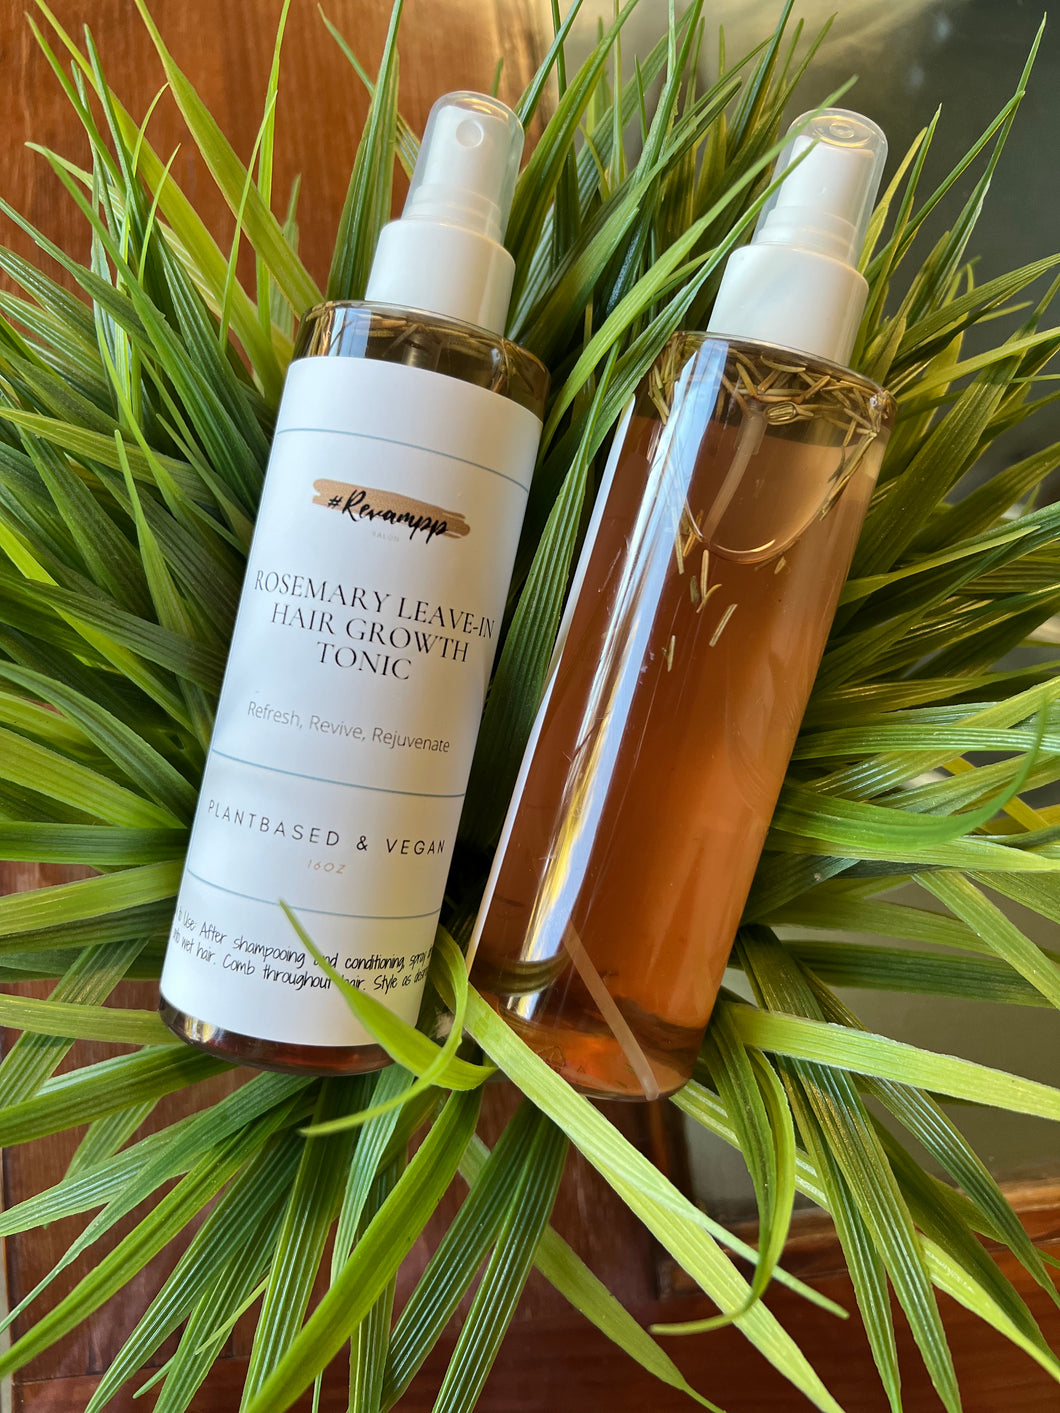 Rosemary Leave In Hair Growth Tonic